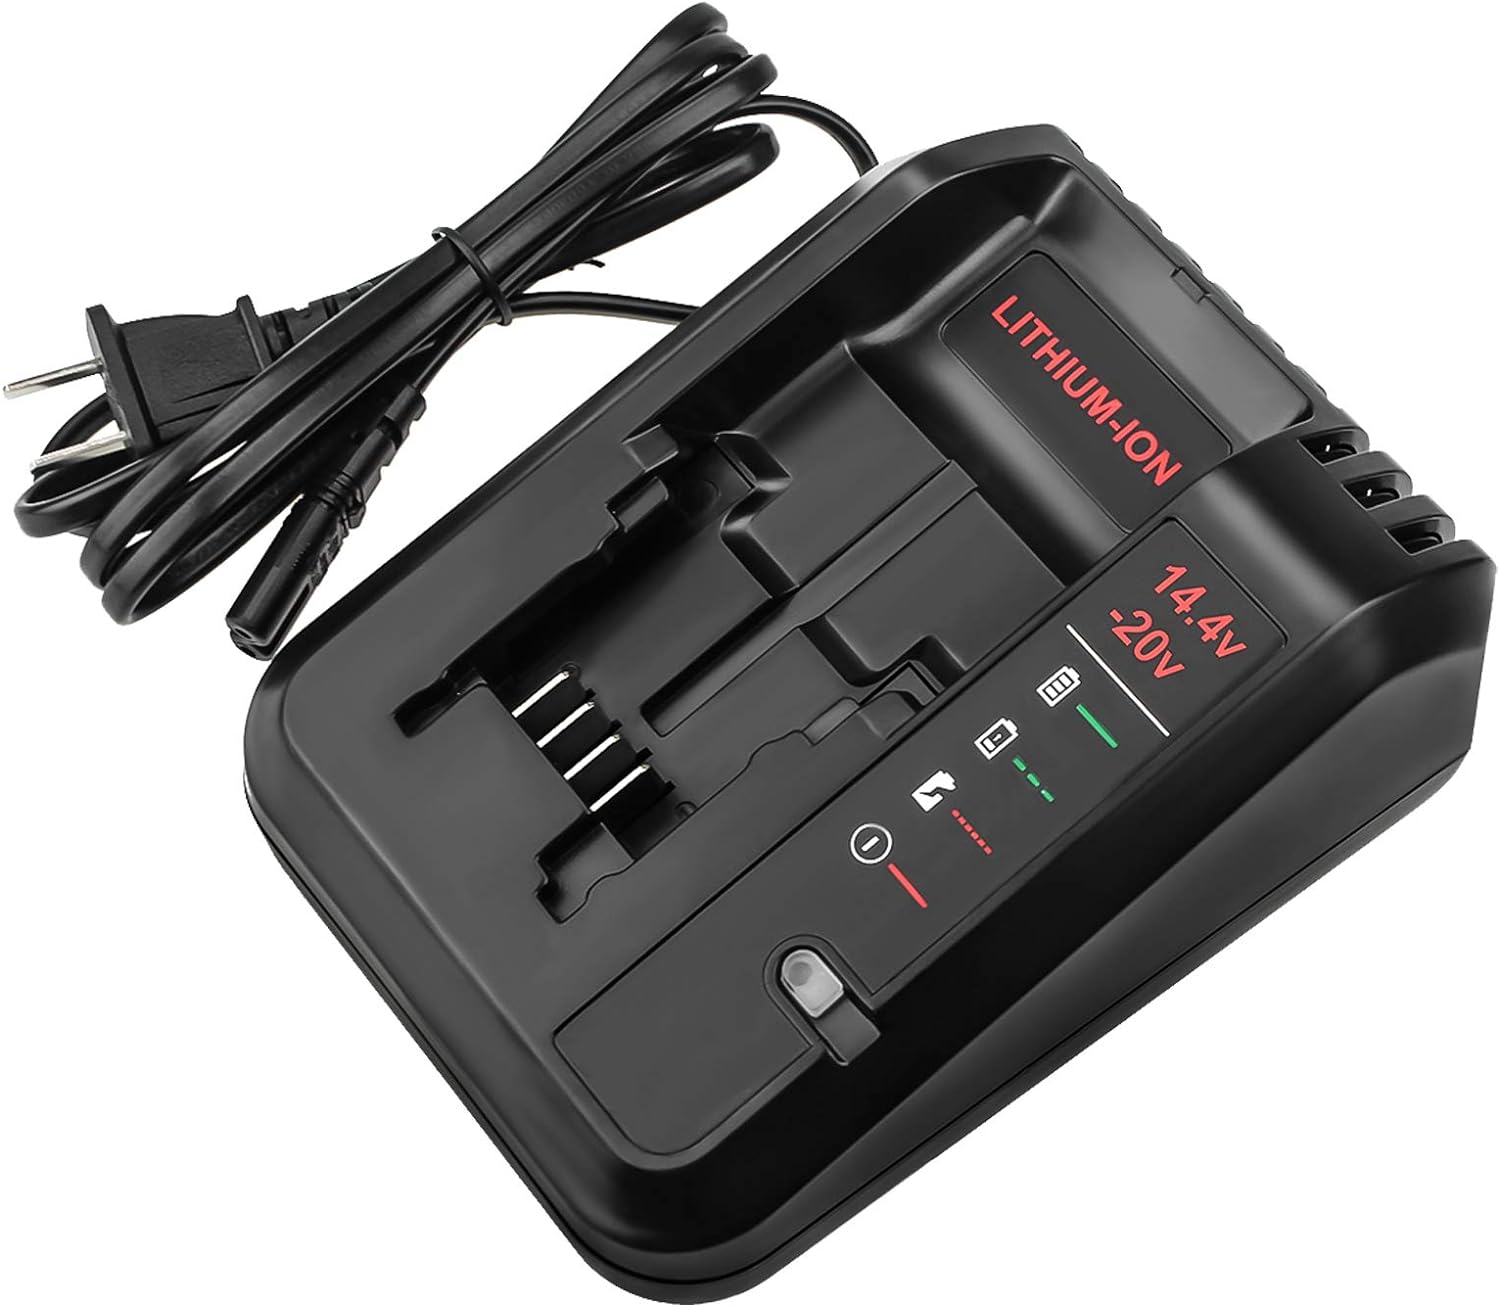 Dosctt Charger Compatible with Black and Decker 20V Lithium Battery LBXR20 LBXR2030 LB2X4020 Compatible with Porter Cable 20V Lithium